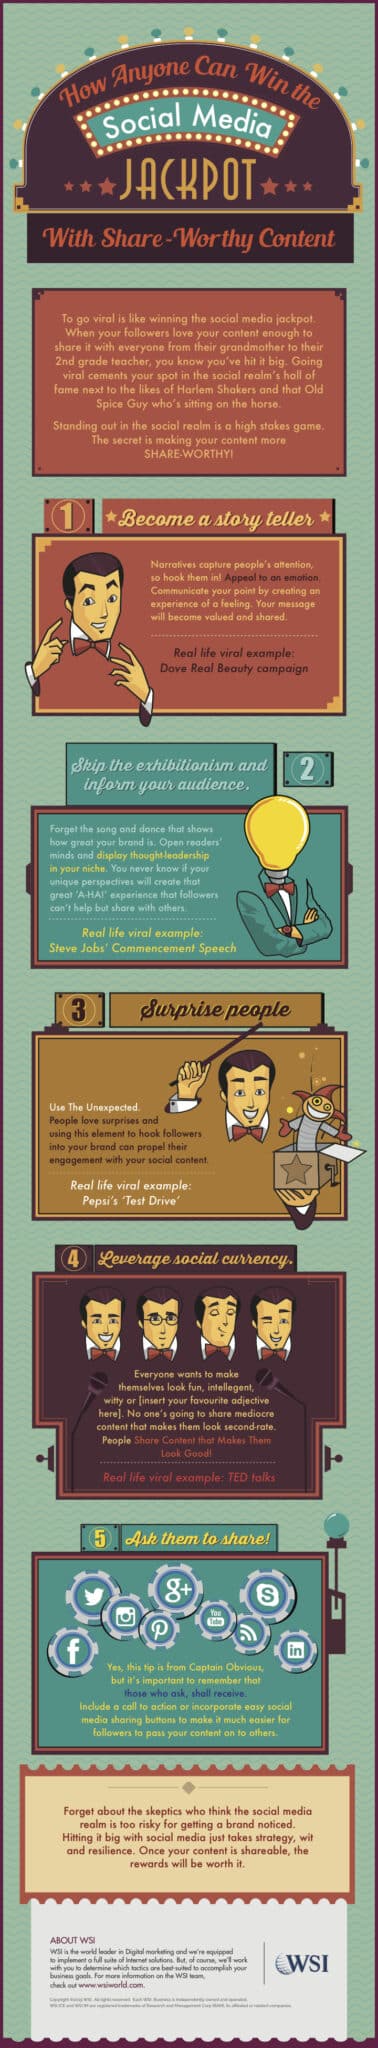 Infographic - The Secret to Winning the Social Media Jackpot